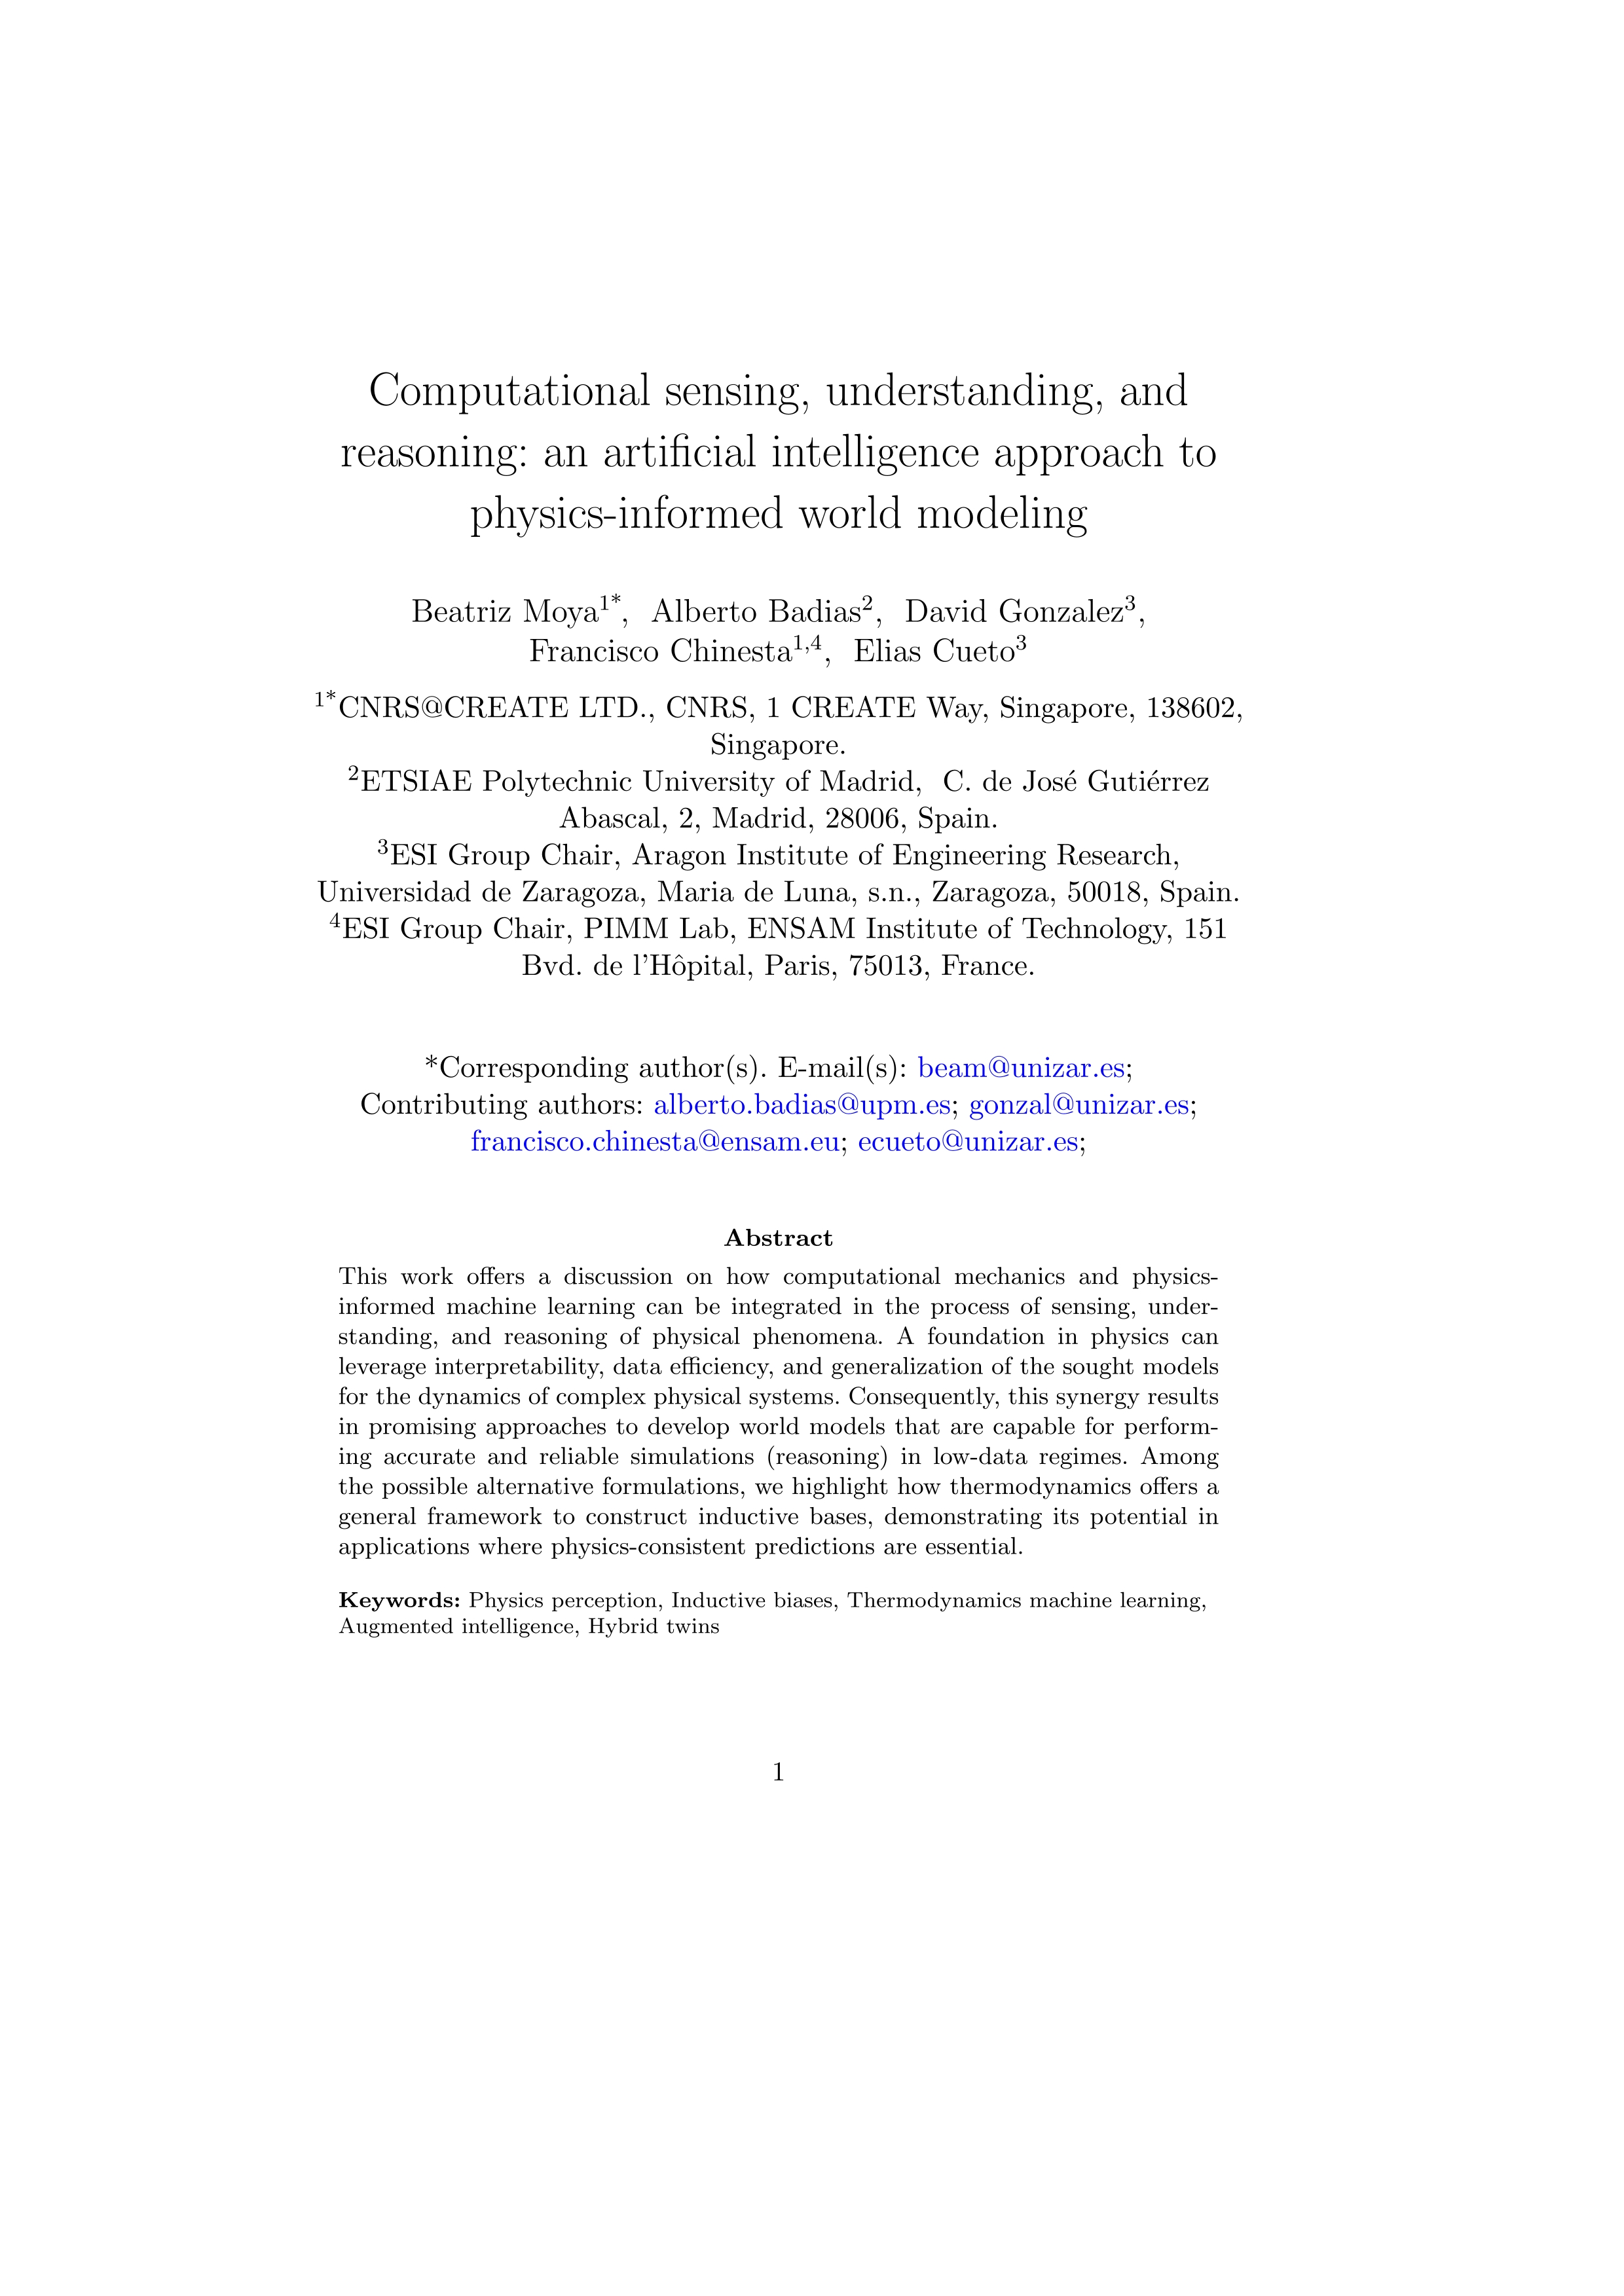 Computational Sensing, Understanding, and Reasoning: An Artificial Intelligence Approach to Physics-Informed World Modeling